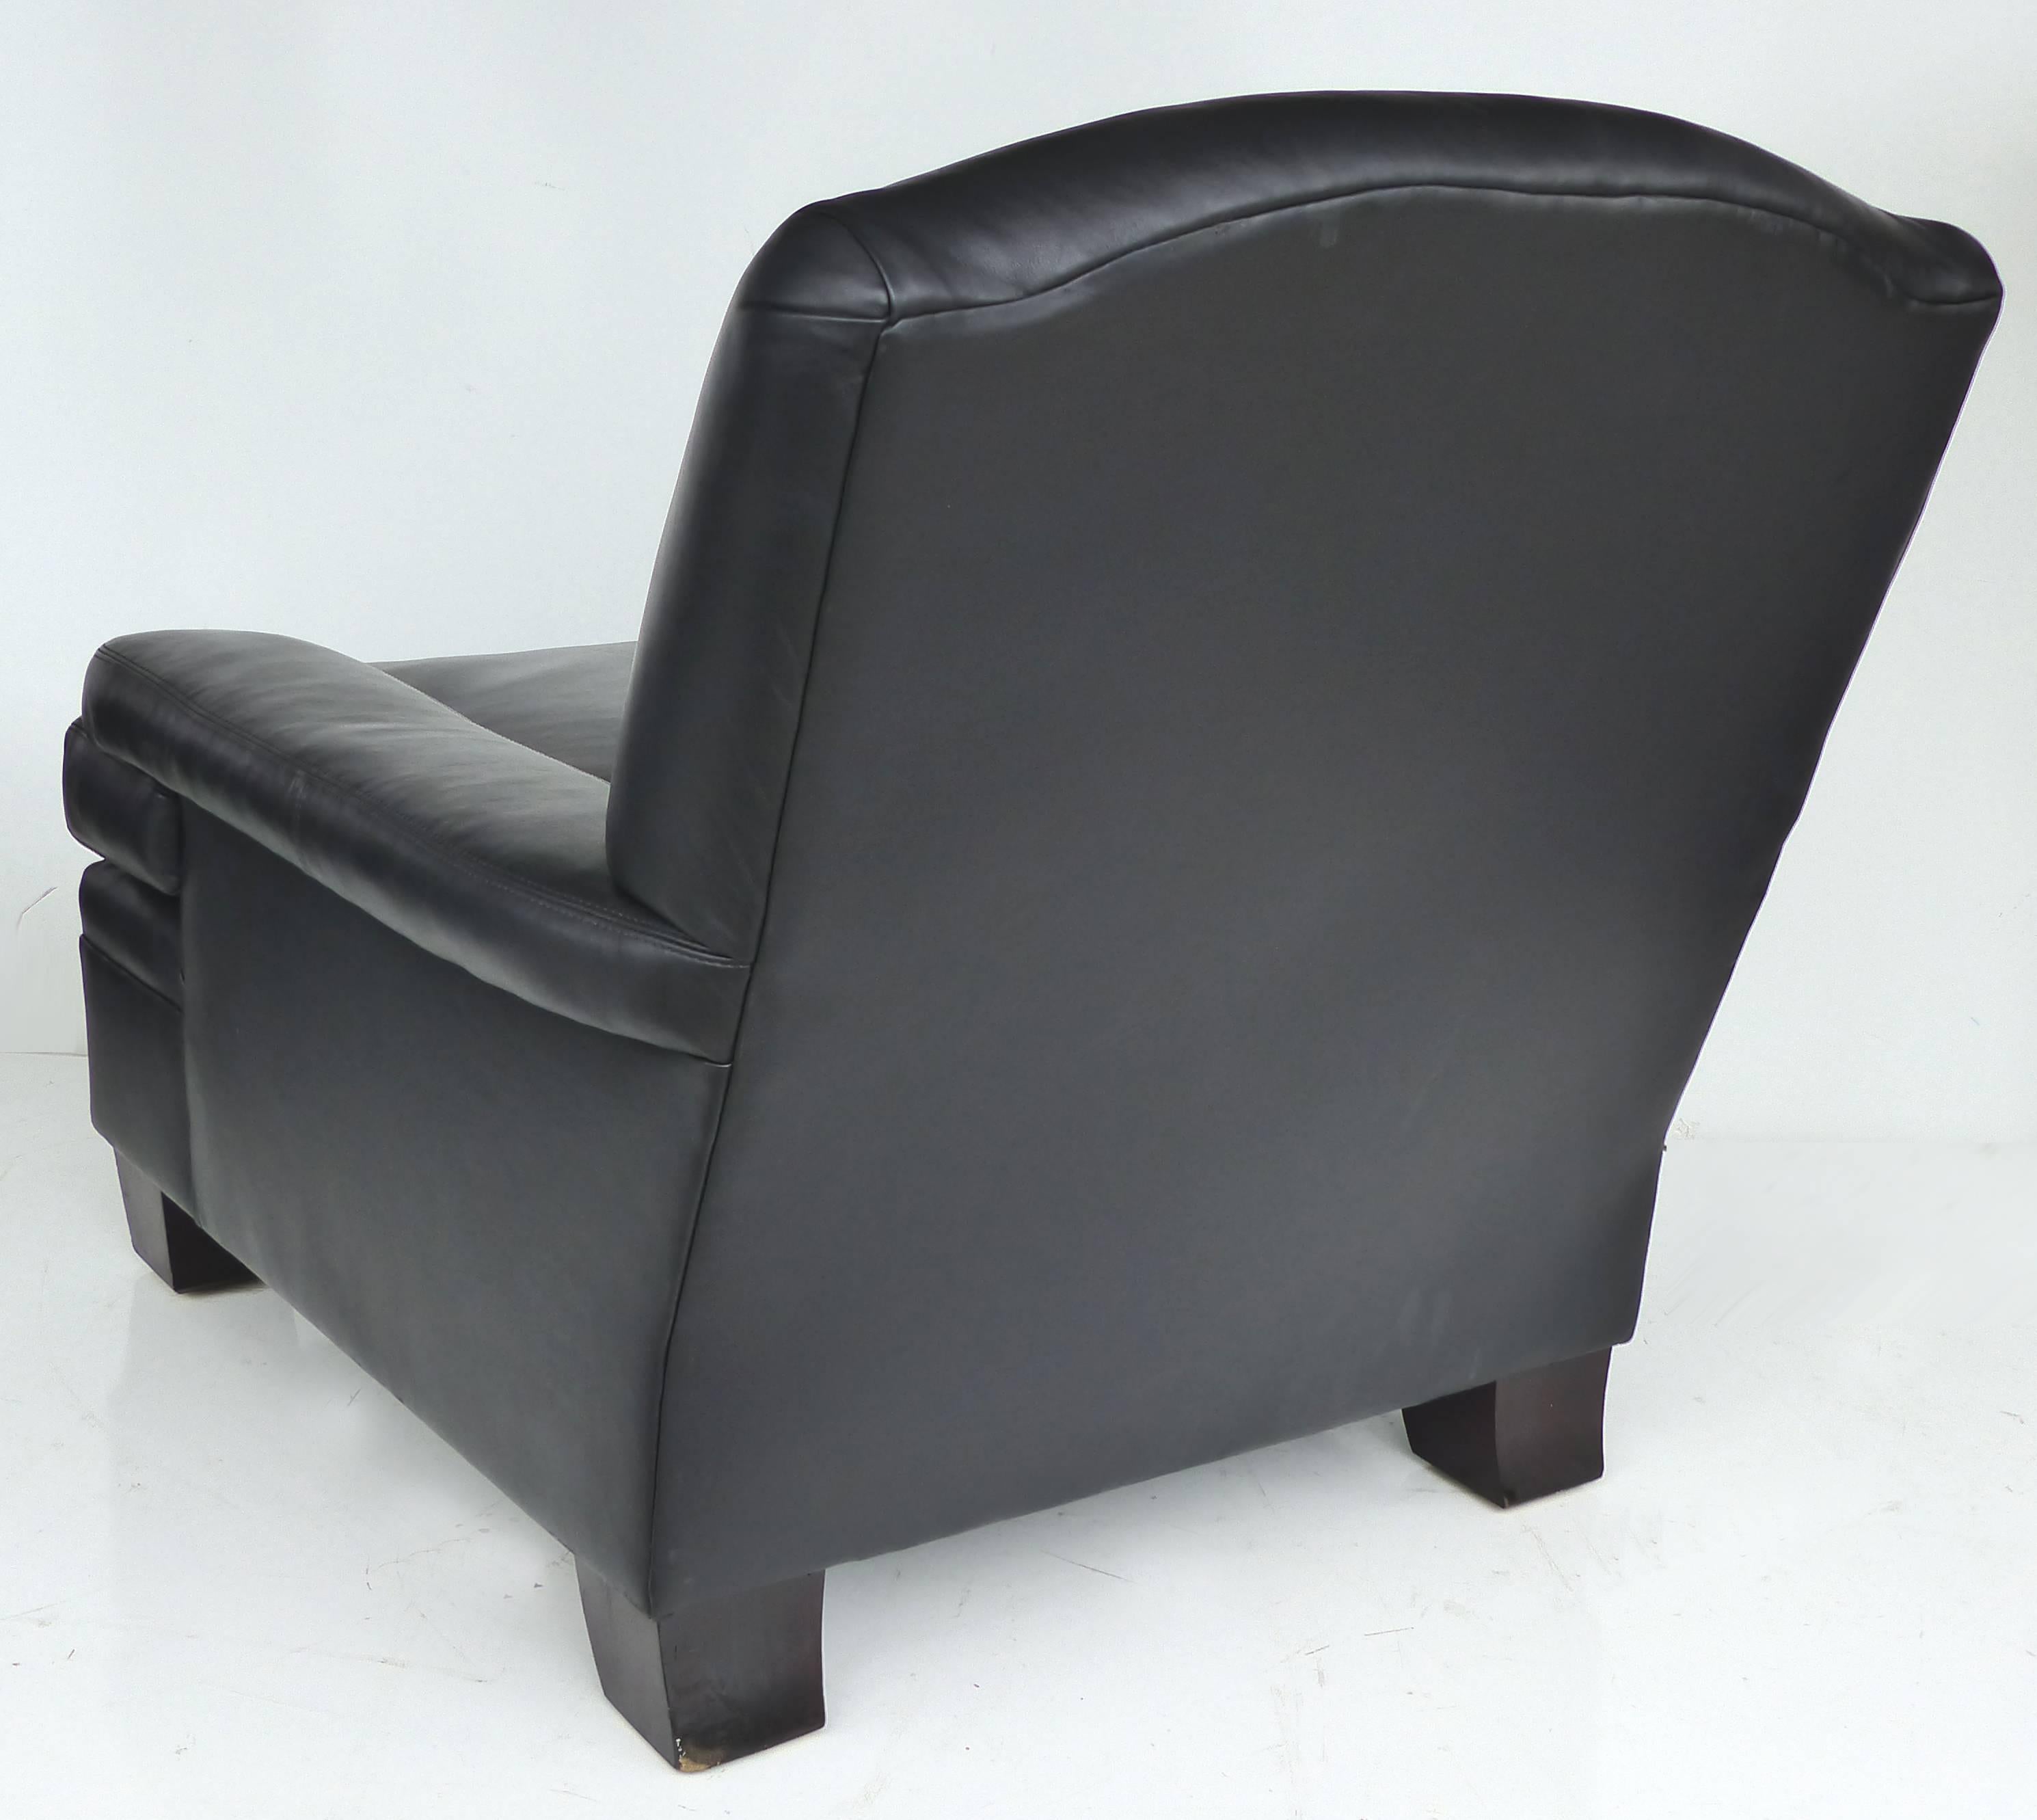 Contemporary Ralph Lauren London Leather Club Chair with Matching Ottoman